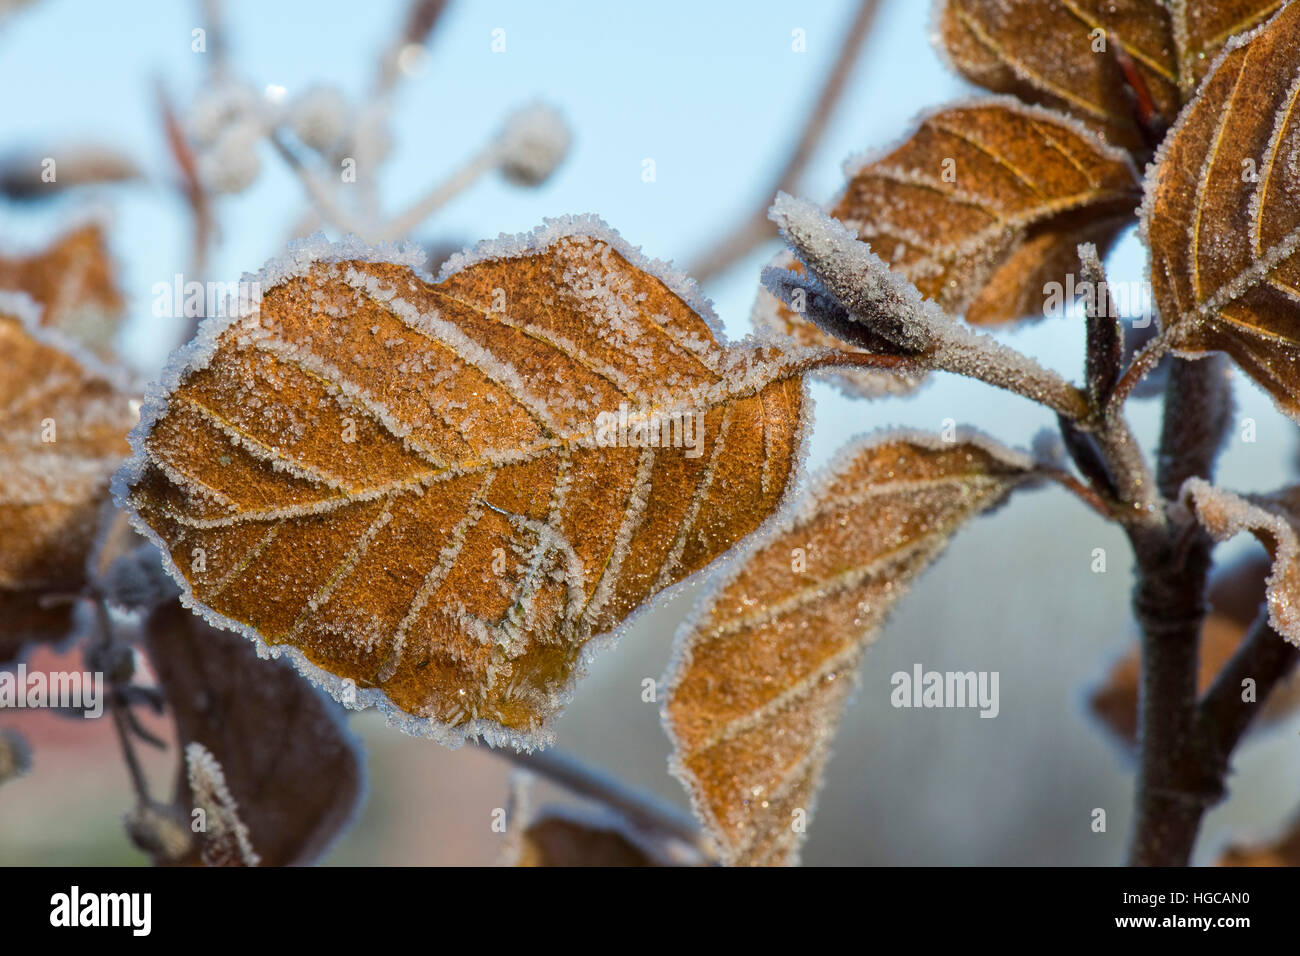 Hard frost on golden brown beech leaves on a cold winter morning in December Stock Photo